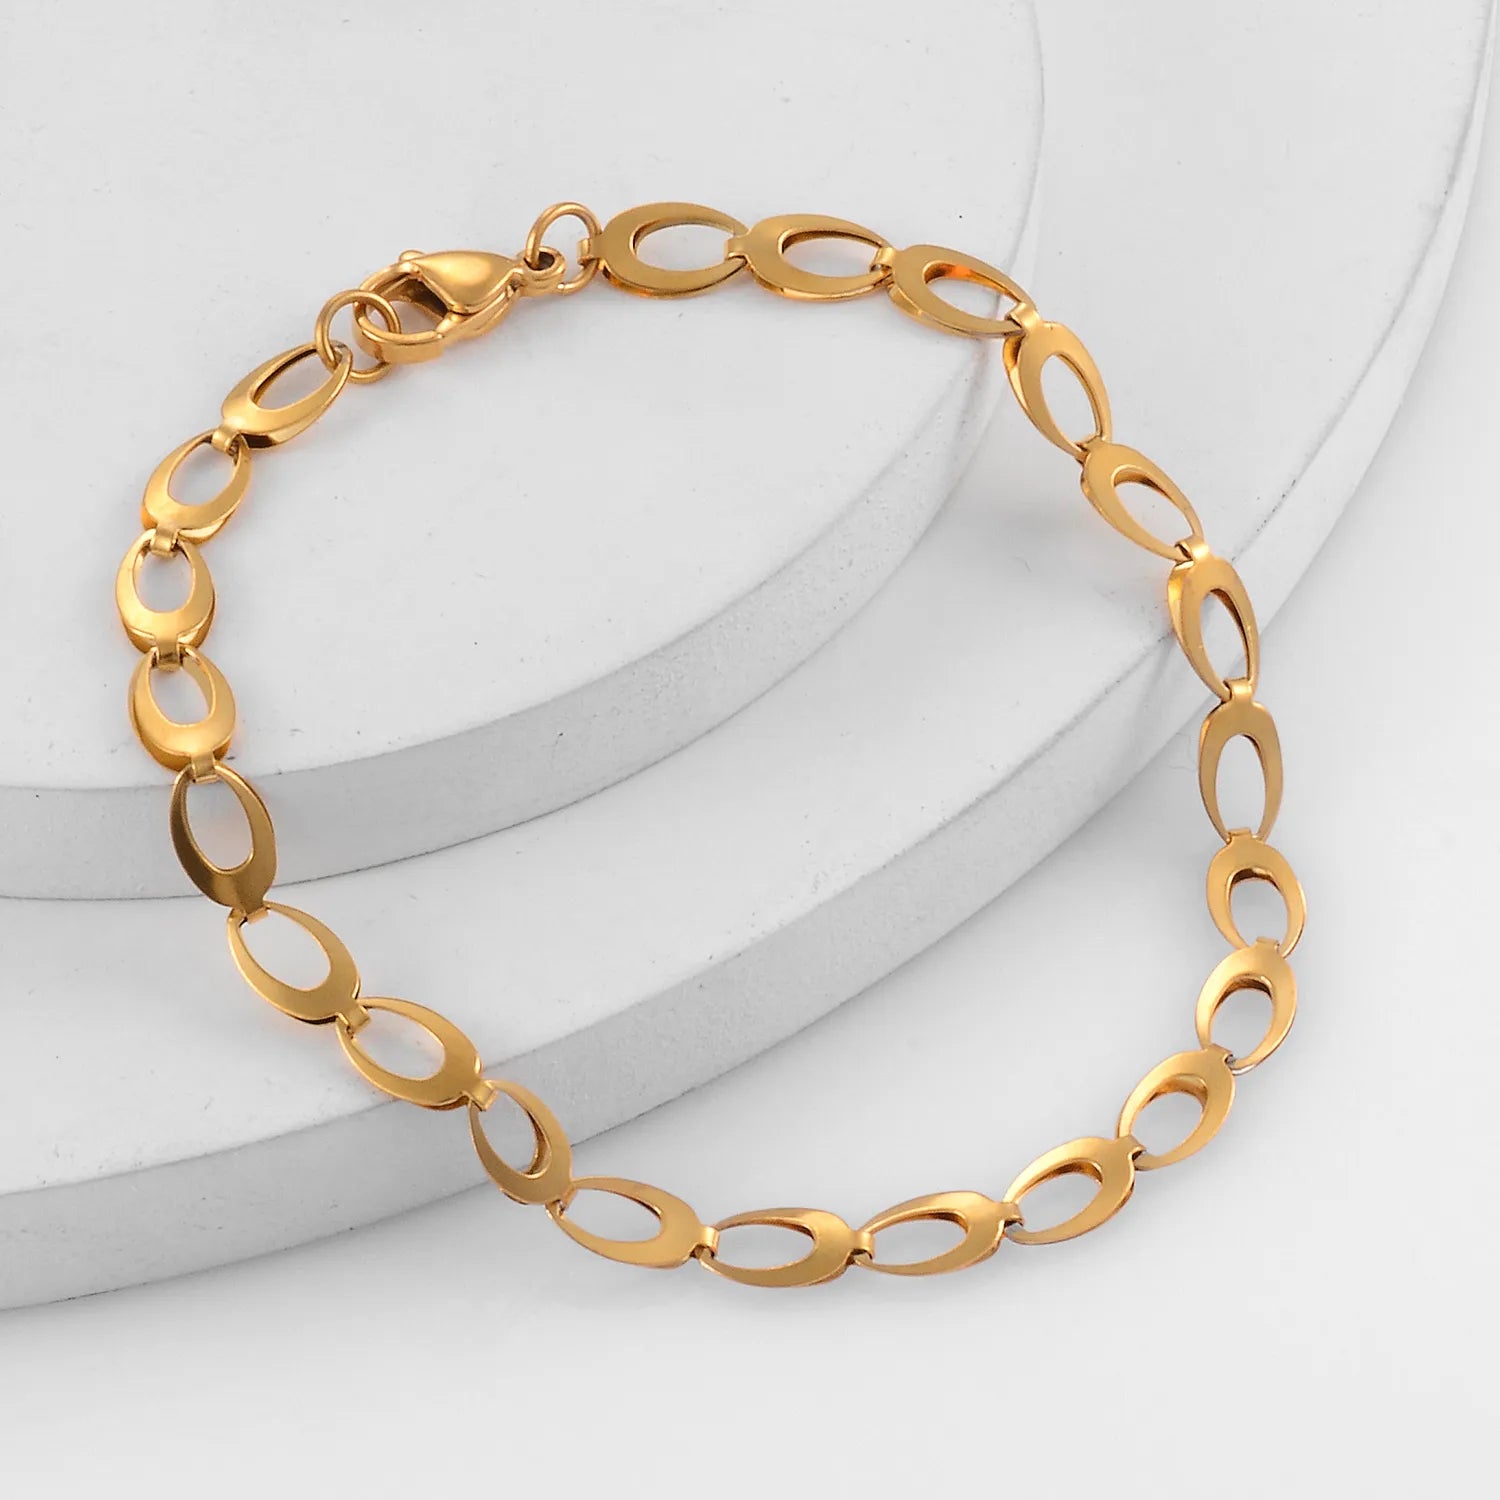 Stainless Steel Personality Gold Color Tone Bracelet Fashion Trend High Quality For Men And Women